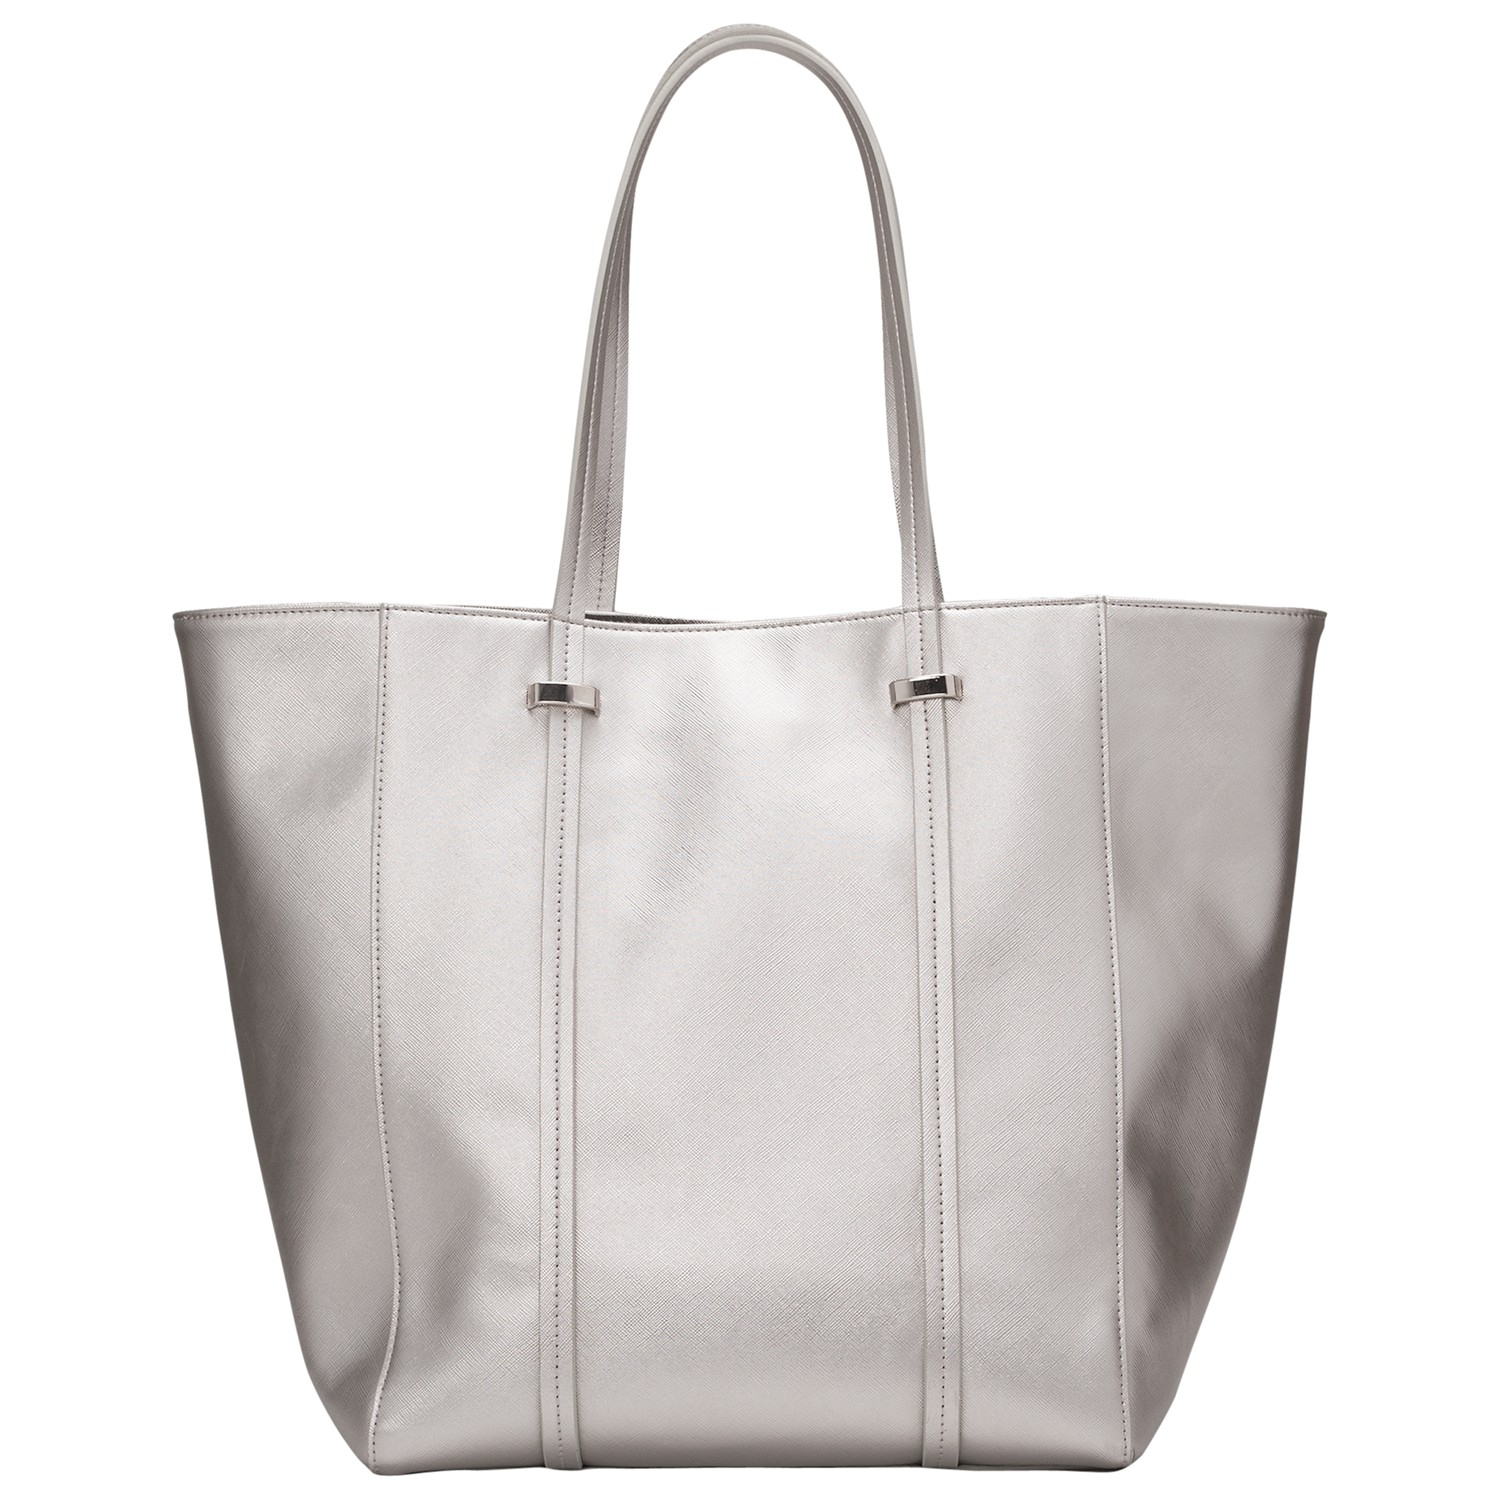 French Connection Aubree Textured Tote Bag in Silver | Lyst